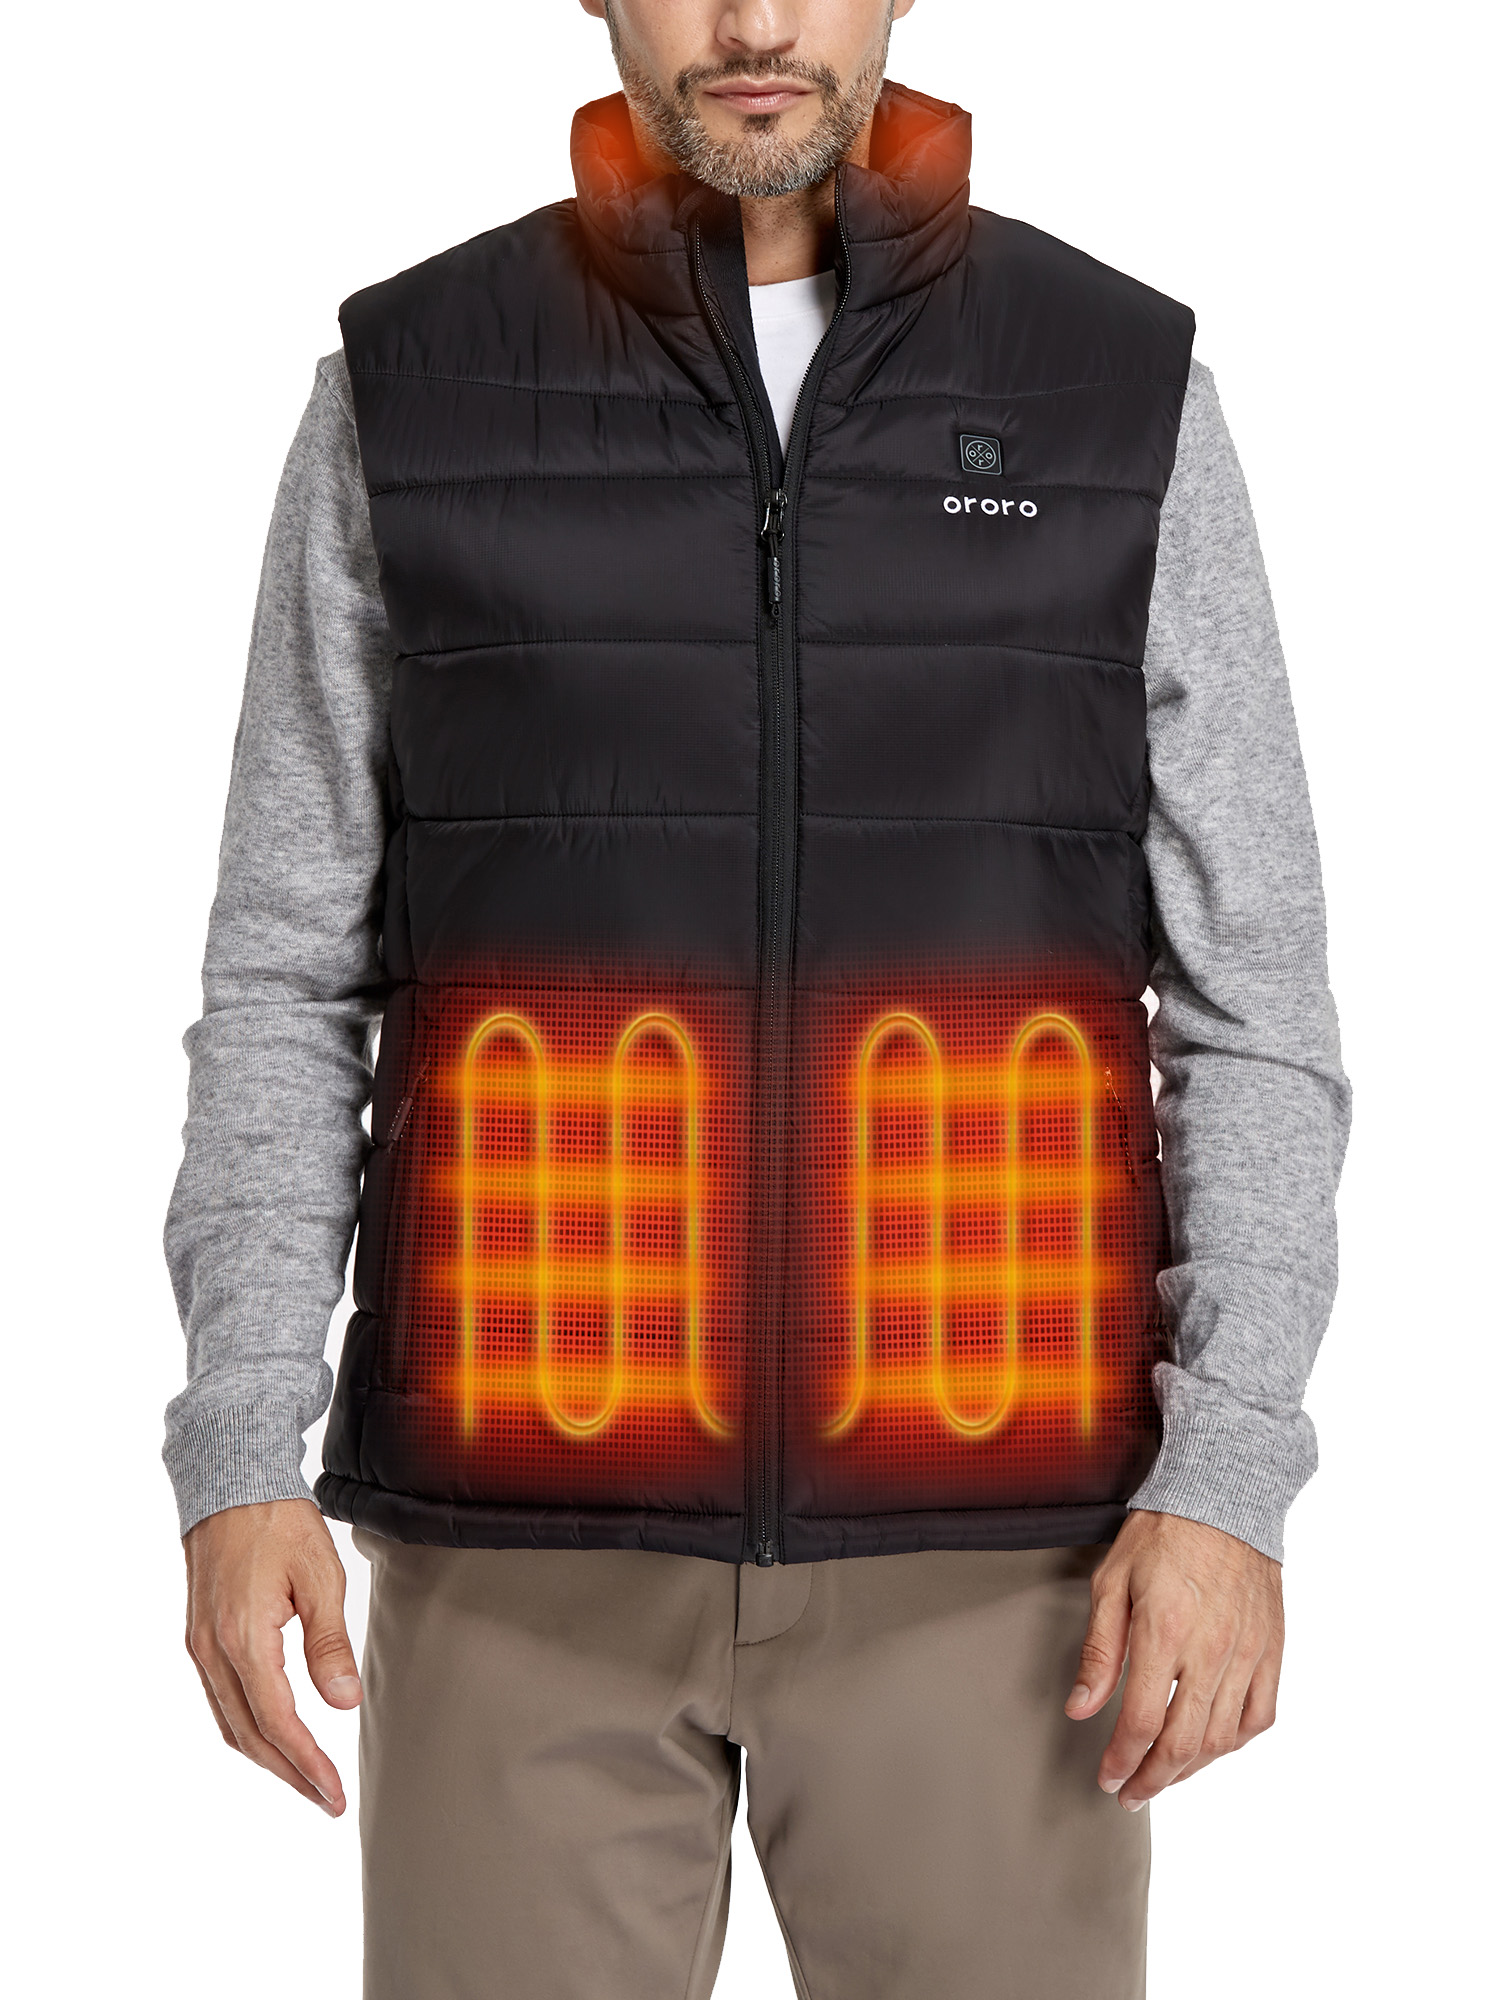 ORORO Men's Heated Vest with Battery, Heating Vest for Hiking Skiing Outdoors (Black, XL) - image 1 of 11